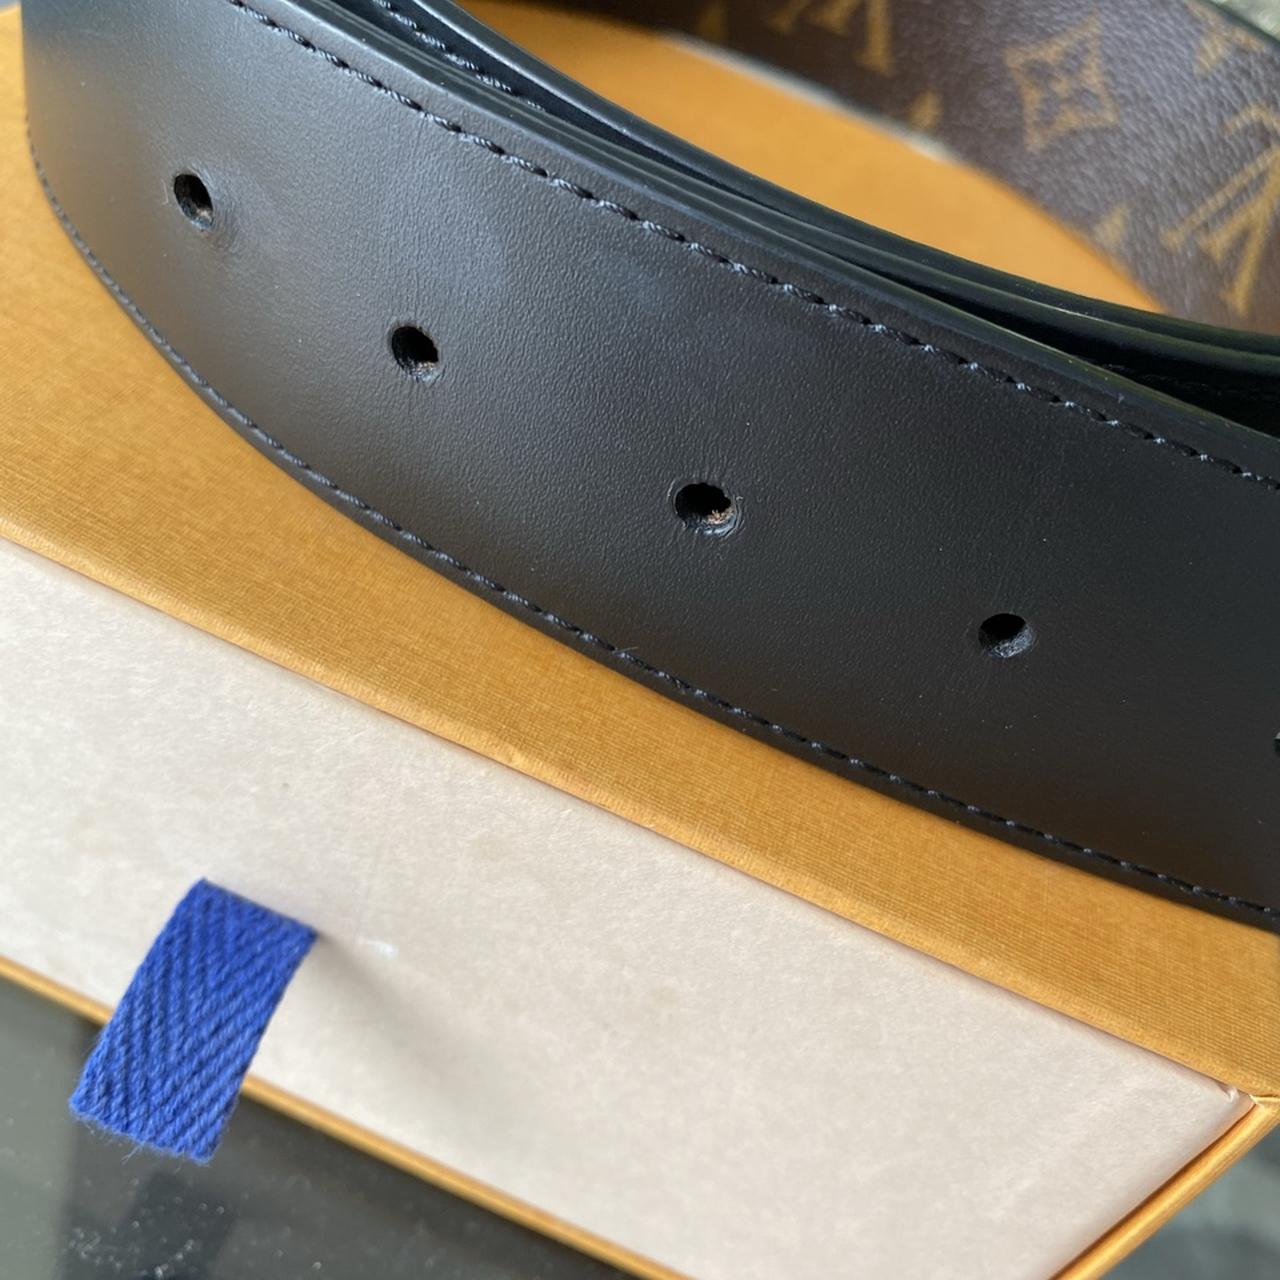 Fairly used louis vuitton belt Size: 43/120 or 36” - Depop